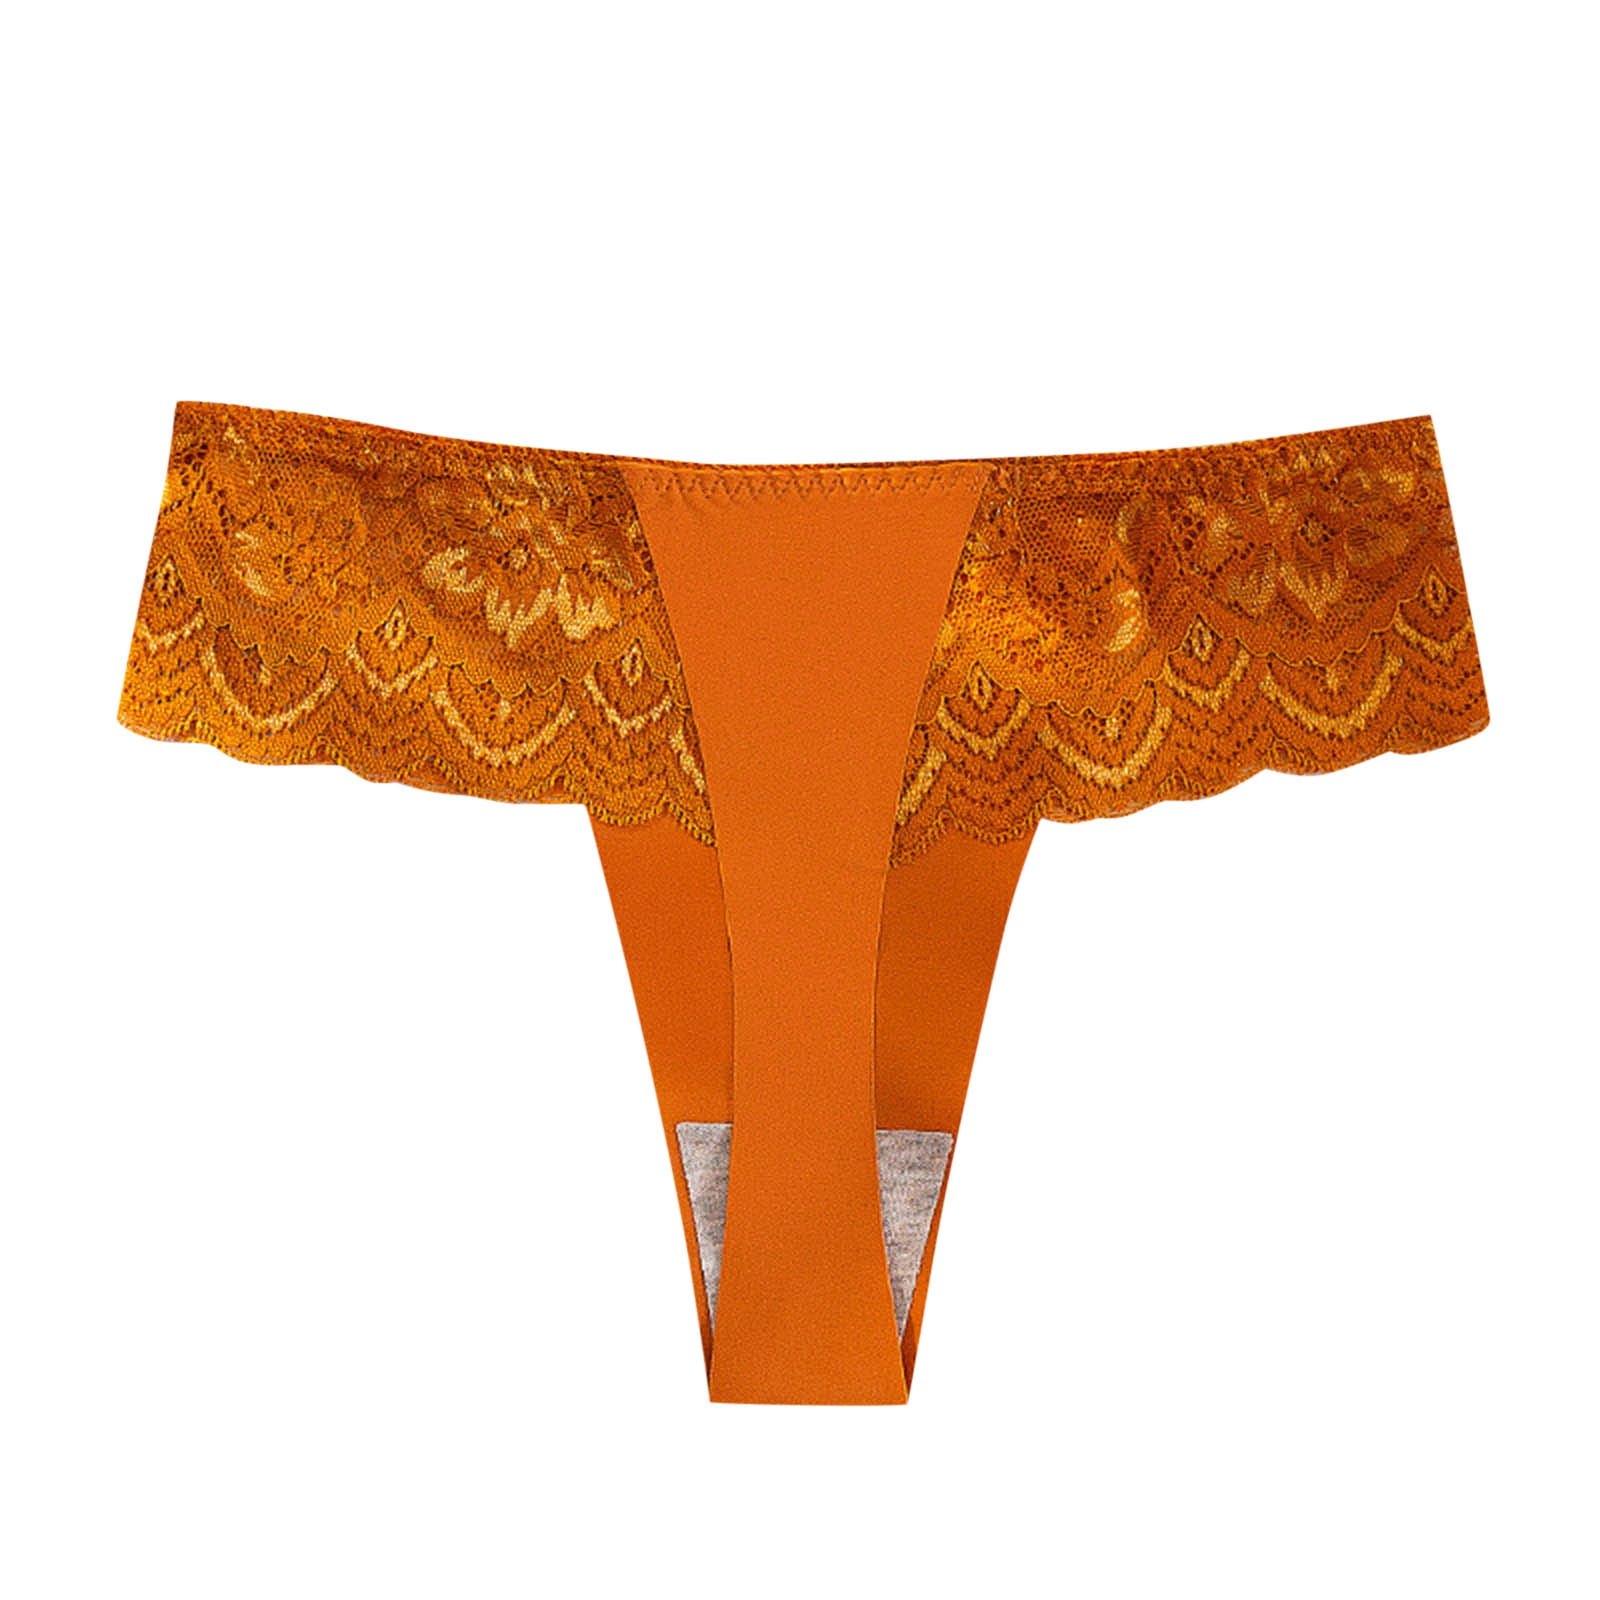 Rovga Panties For Women Female'S Lace Panty Green Comfort